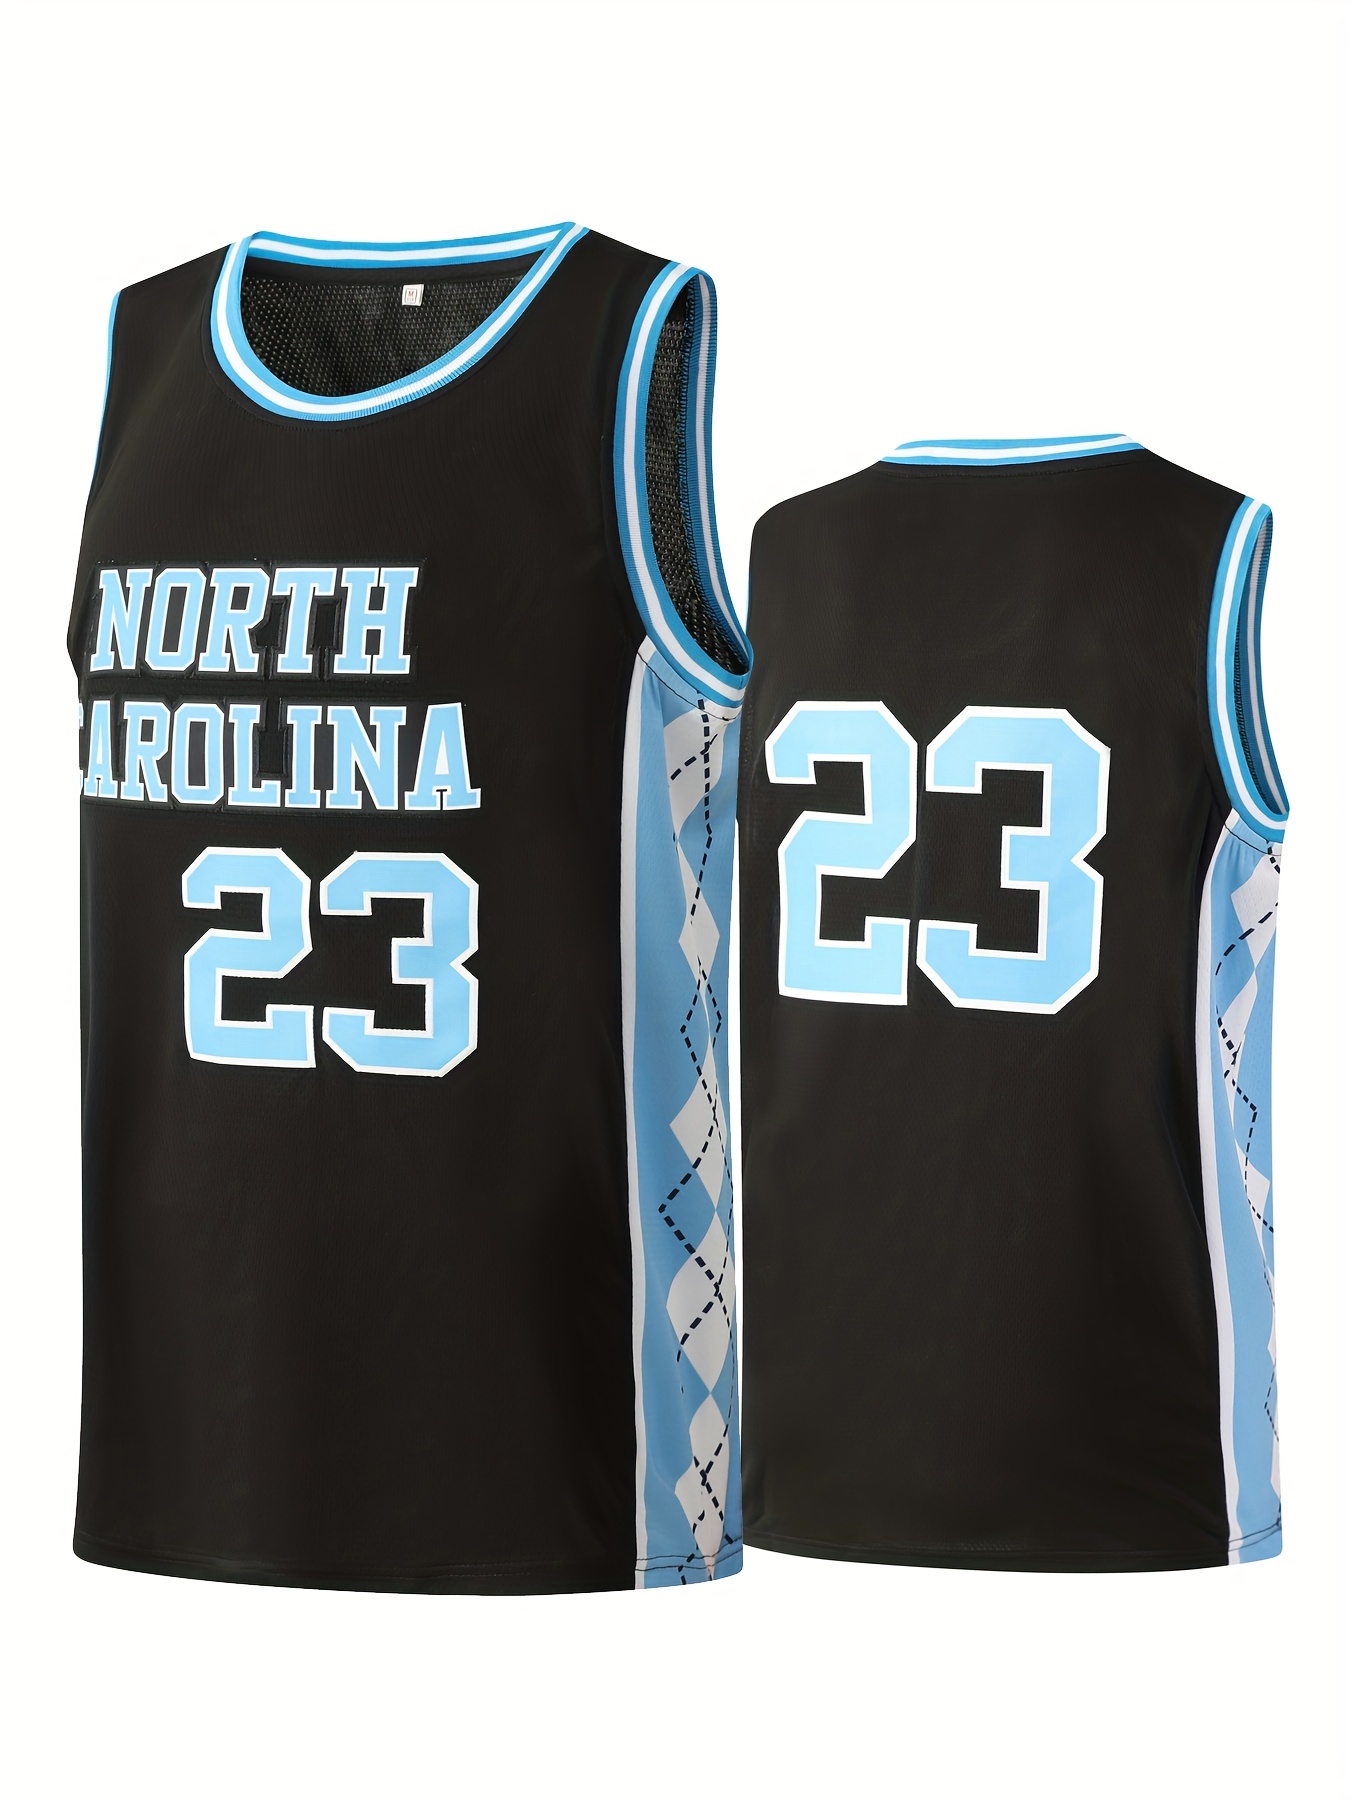 Temu Men's North Carolina #23 Embroidery Basketball Jersey, Vintage Breathable Round Neck Sleeveless Basketball Shirt for Training Competition